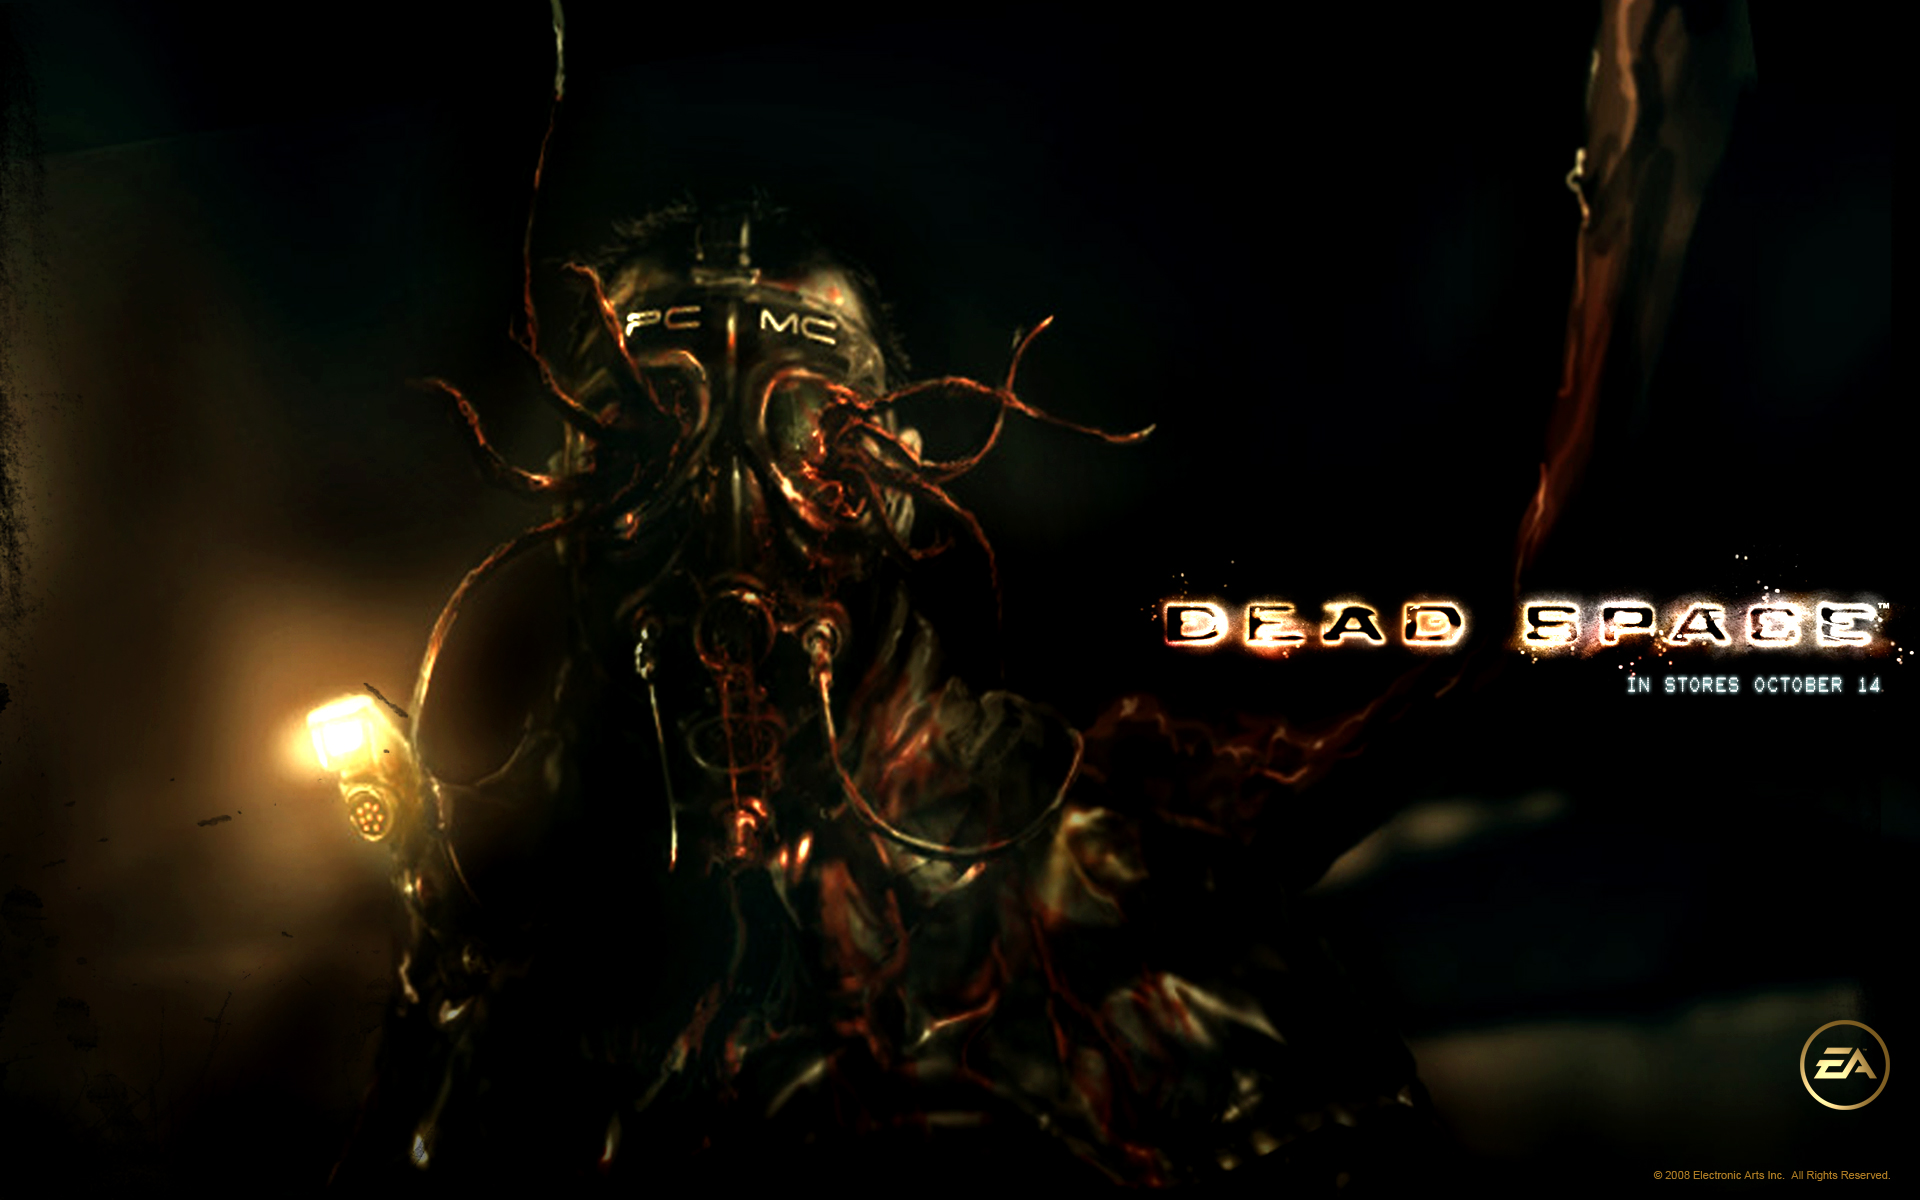 download free dead space 1